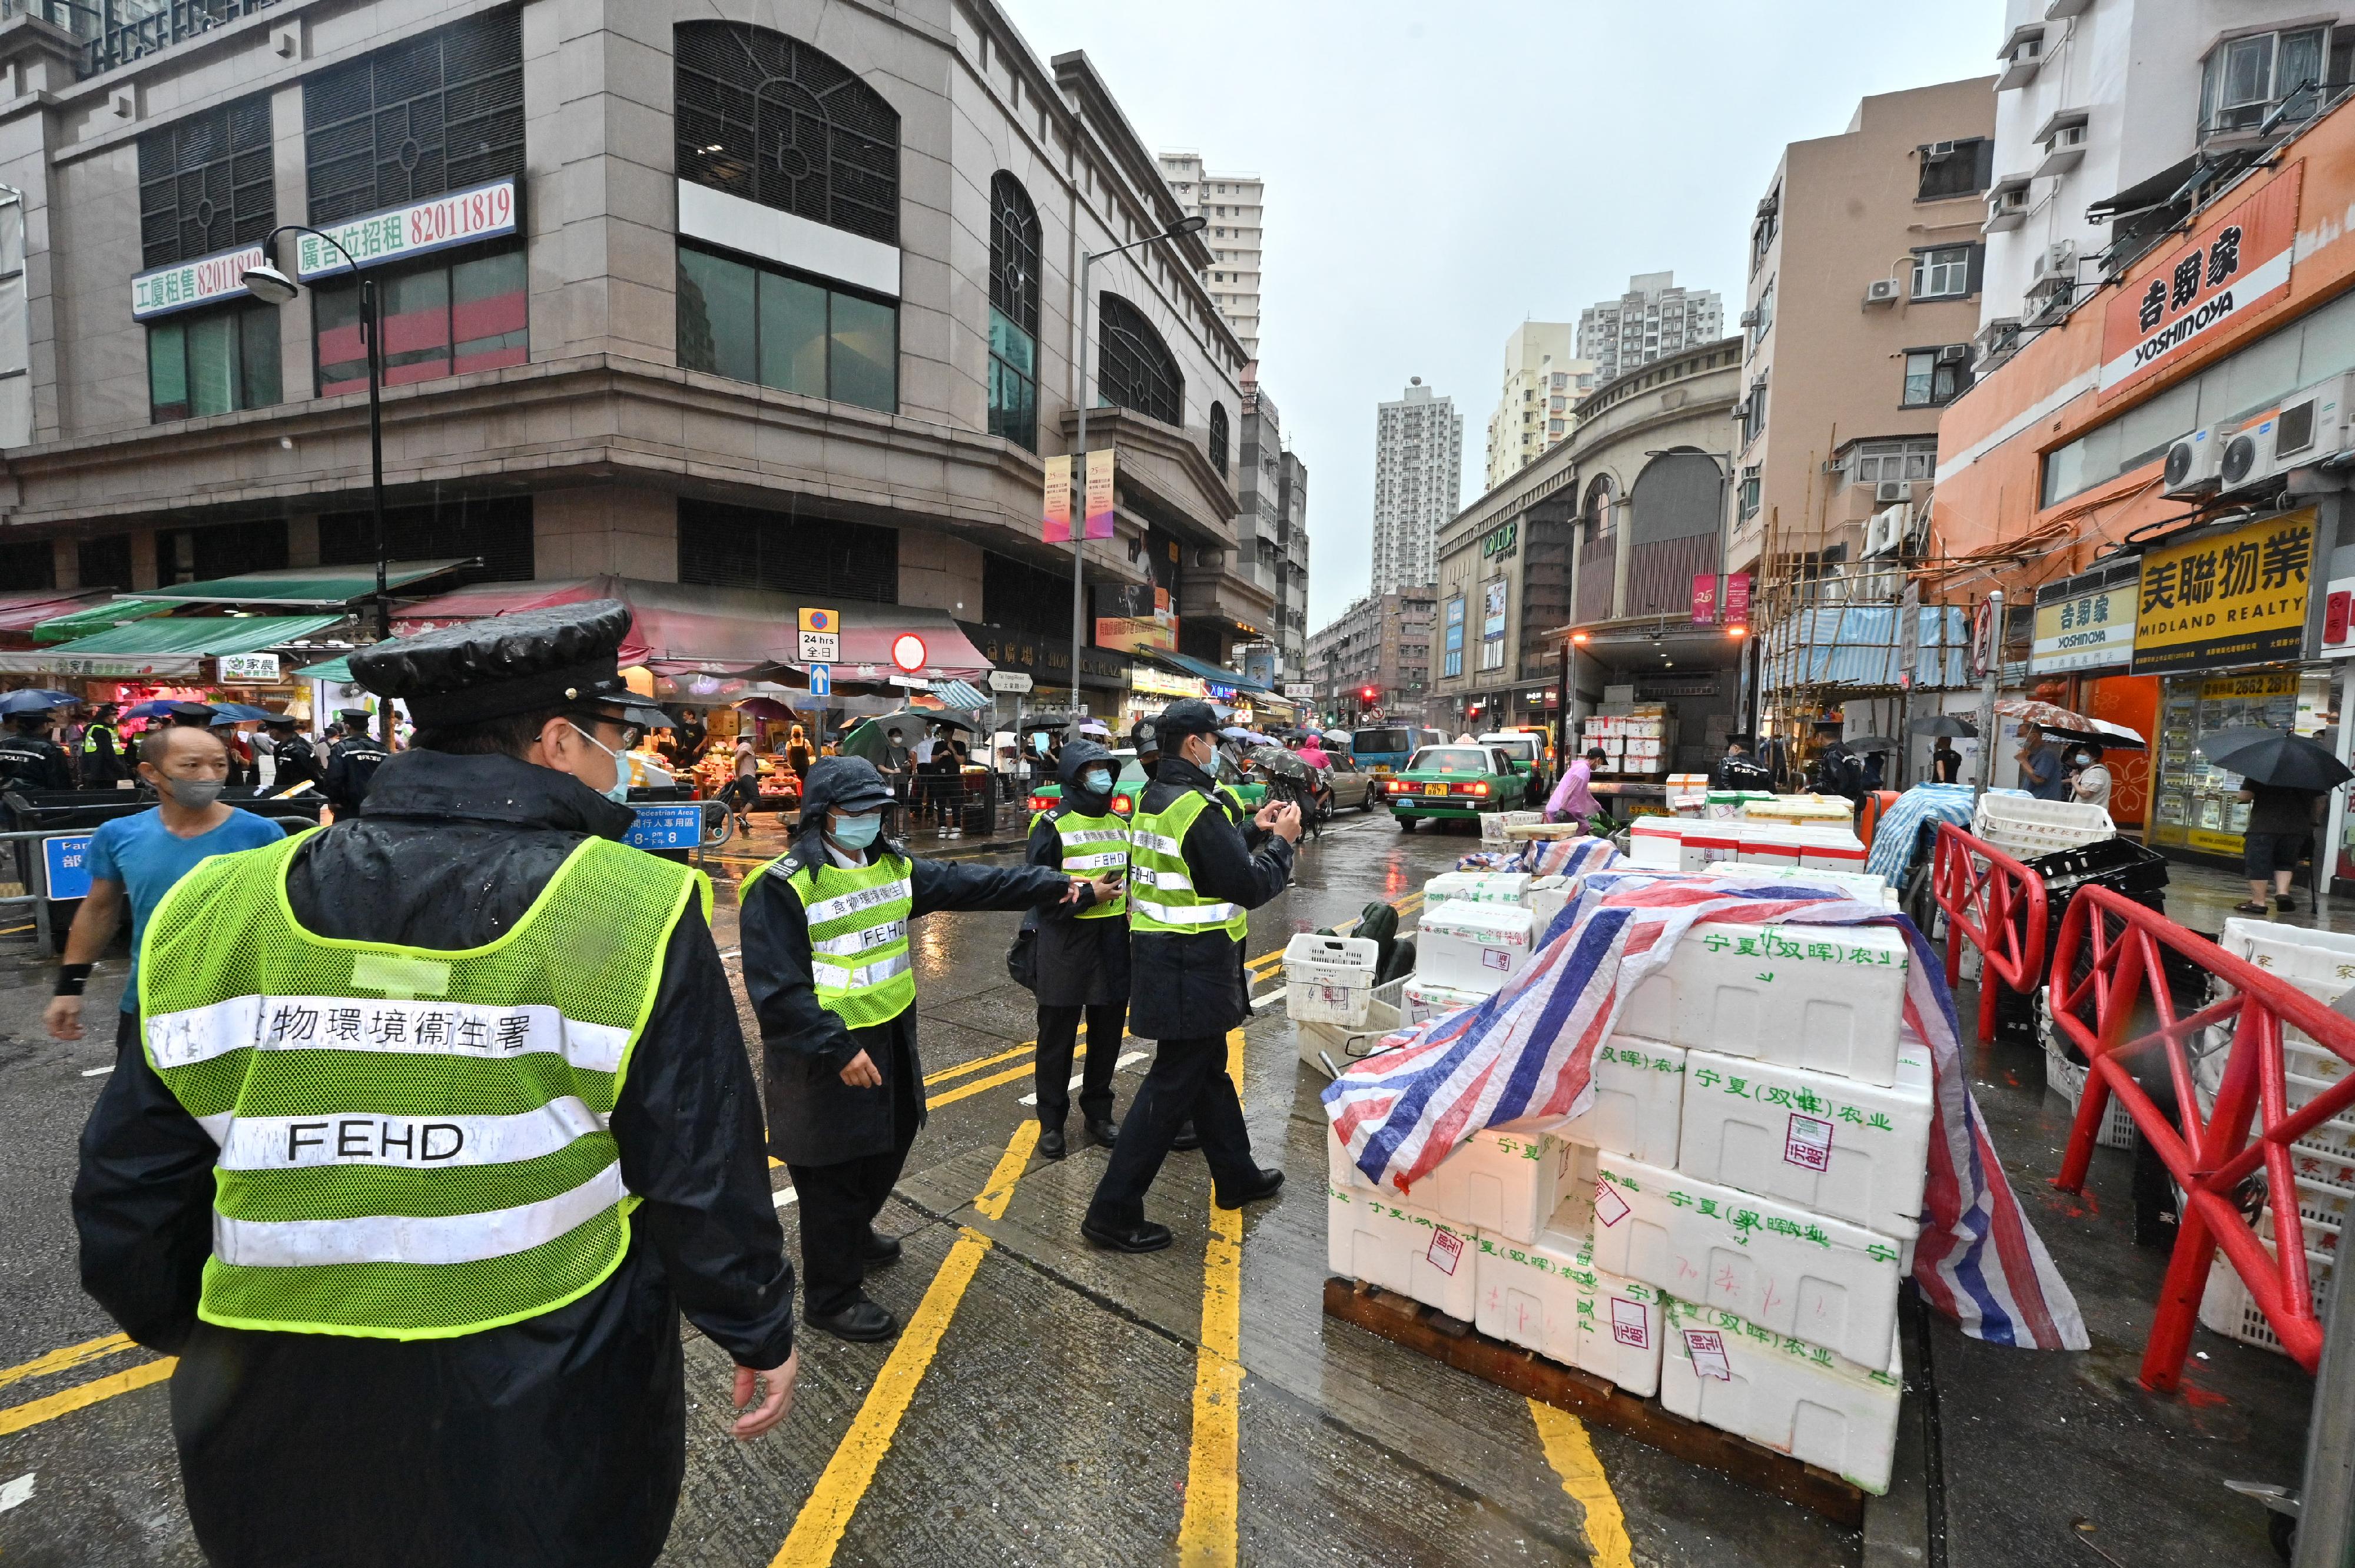 To tackle the illegal shop extension and obstruction problems, the Food and Environmental Hygiene Department (FEHD) and the Police formally launched the second phase of the trial scheme since June 7 (Tuesday) in Sham Shui Po, Yuen Long and Eastern Districts, to conduct joint operations with new enforcement strategy. Photo shows the joint operation of the FEHD and the Police in Yuen Long.